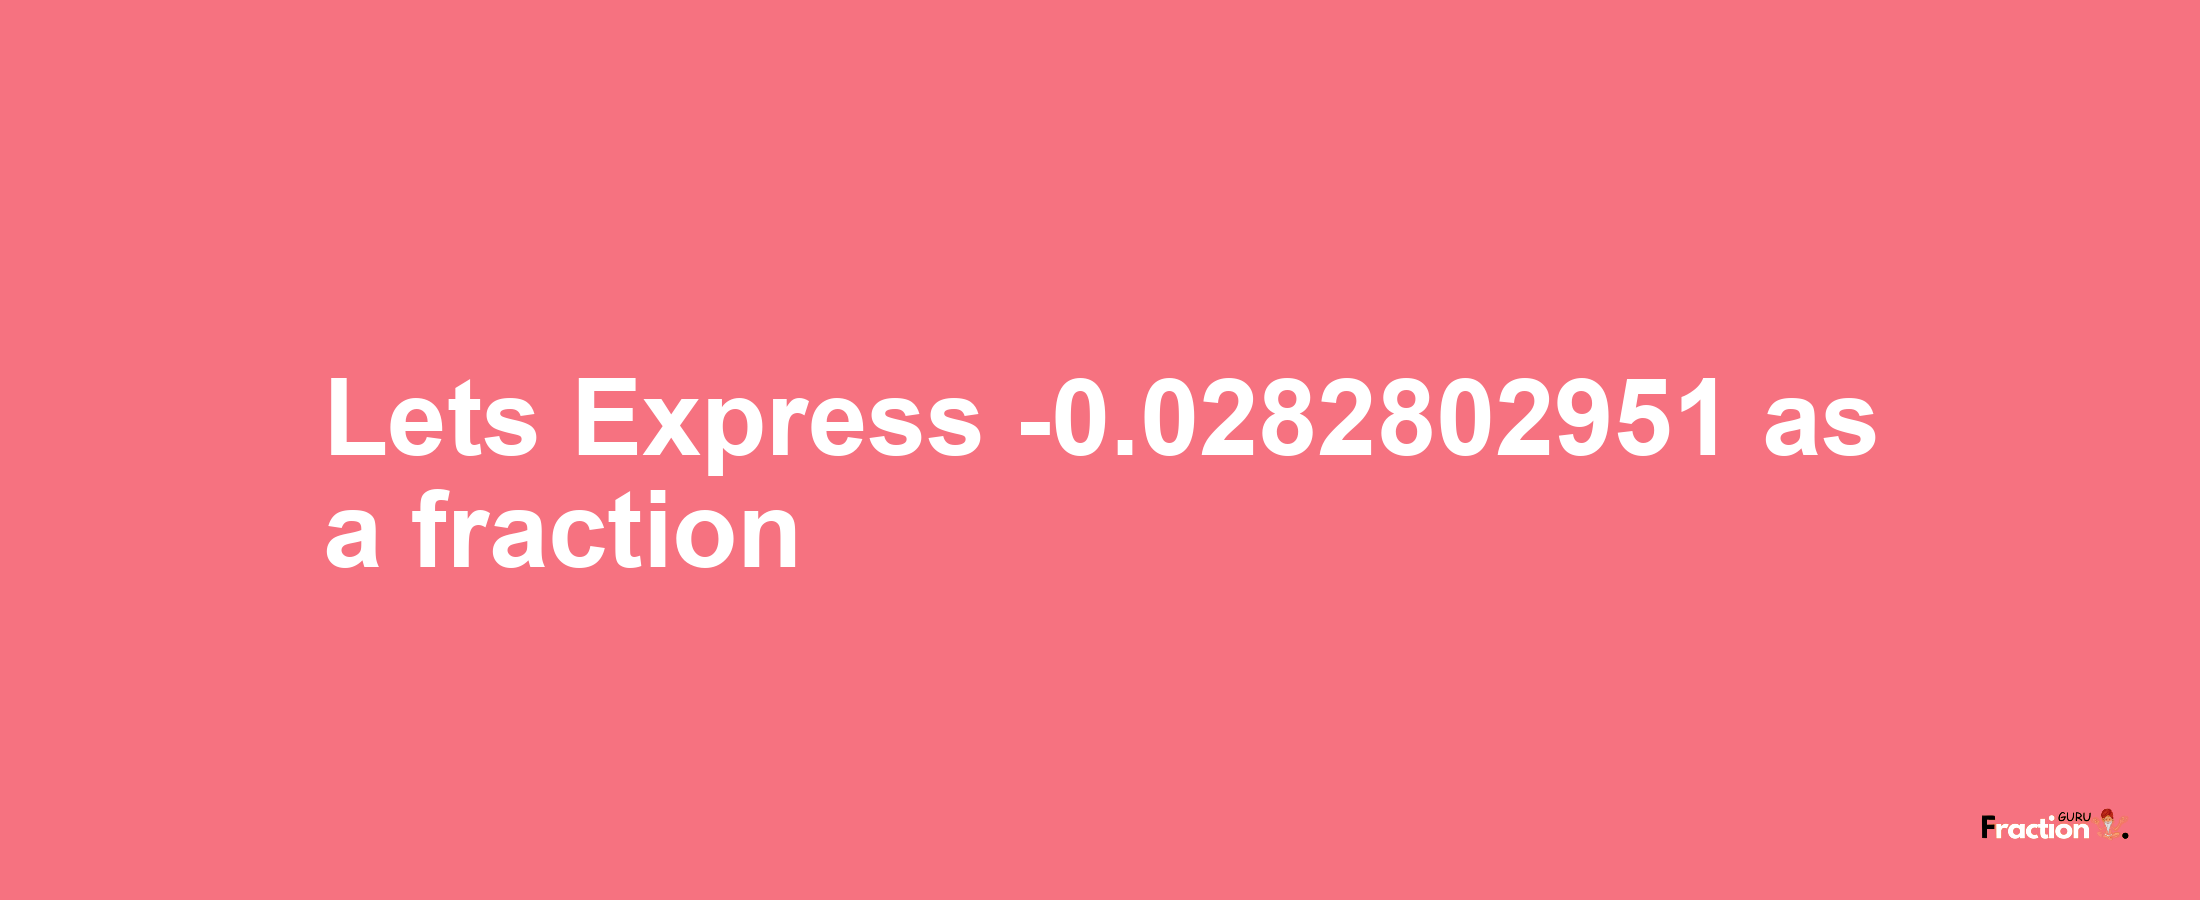 Lets Express -0.0282802951 as afraction